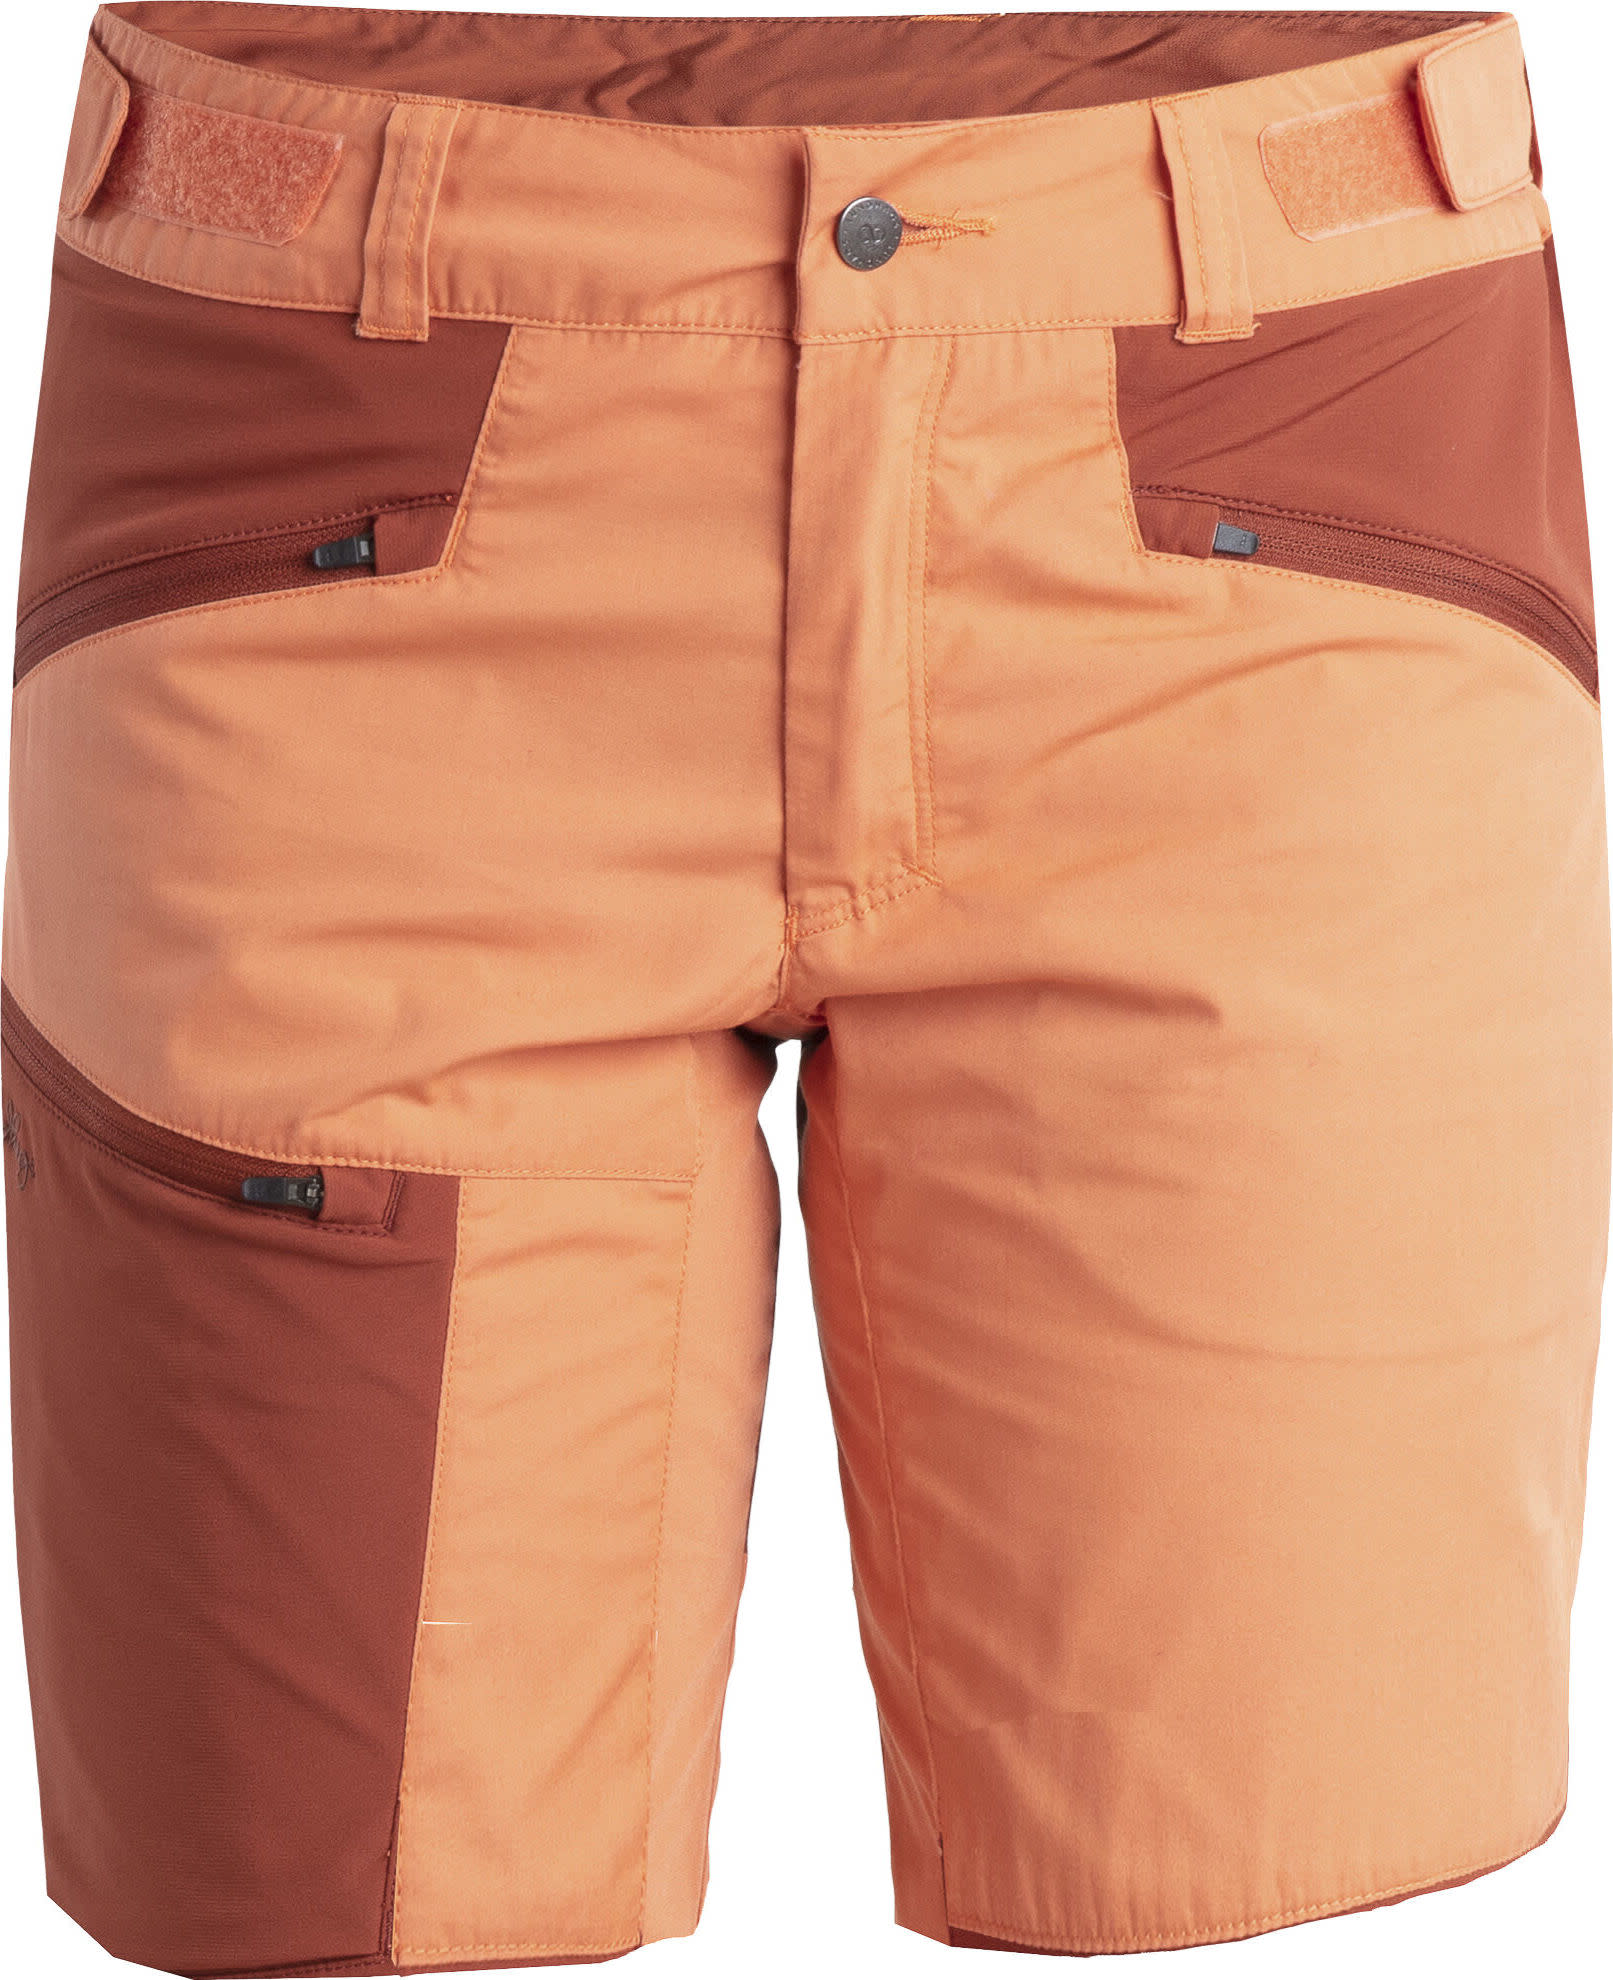 Lundhags Women's Makke Light Shorts Coral/Rust 34, Coral/Rust